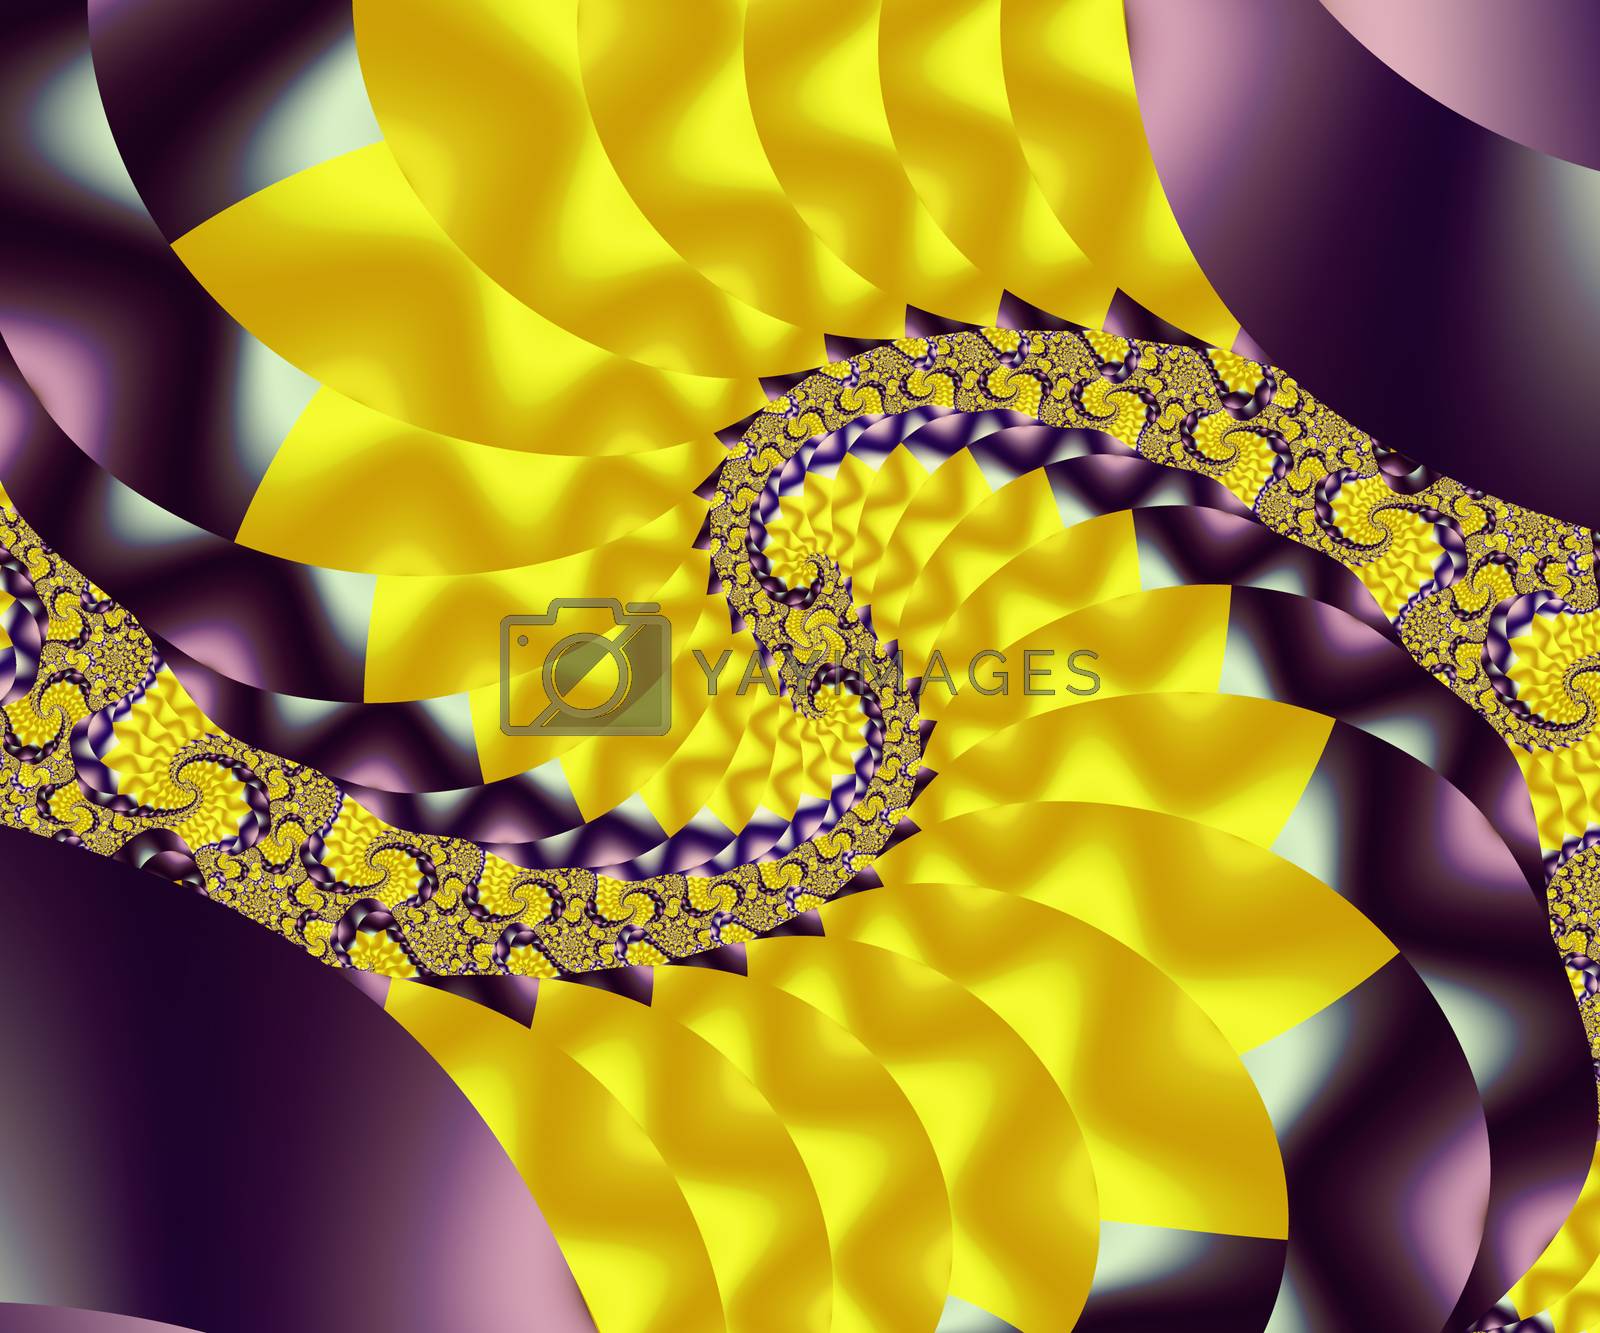 Royalty free image of Computer generated abstract colorful fractal artwork by stocklady